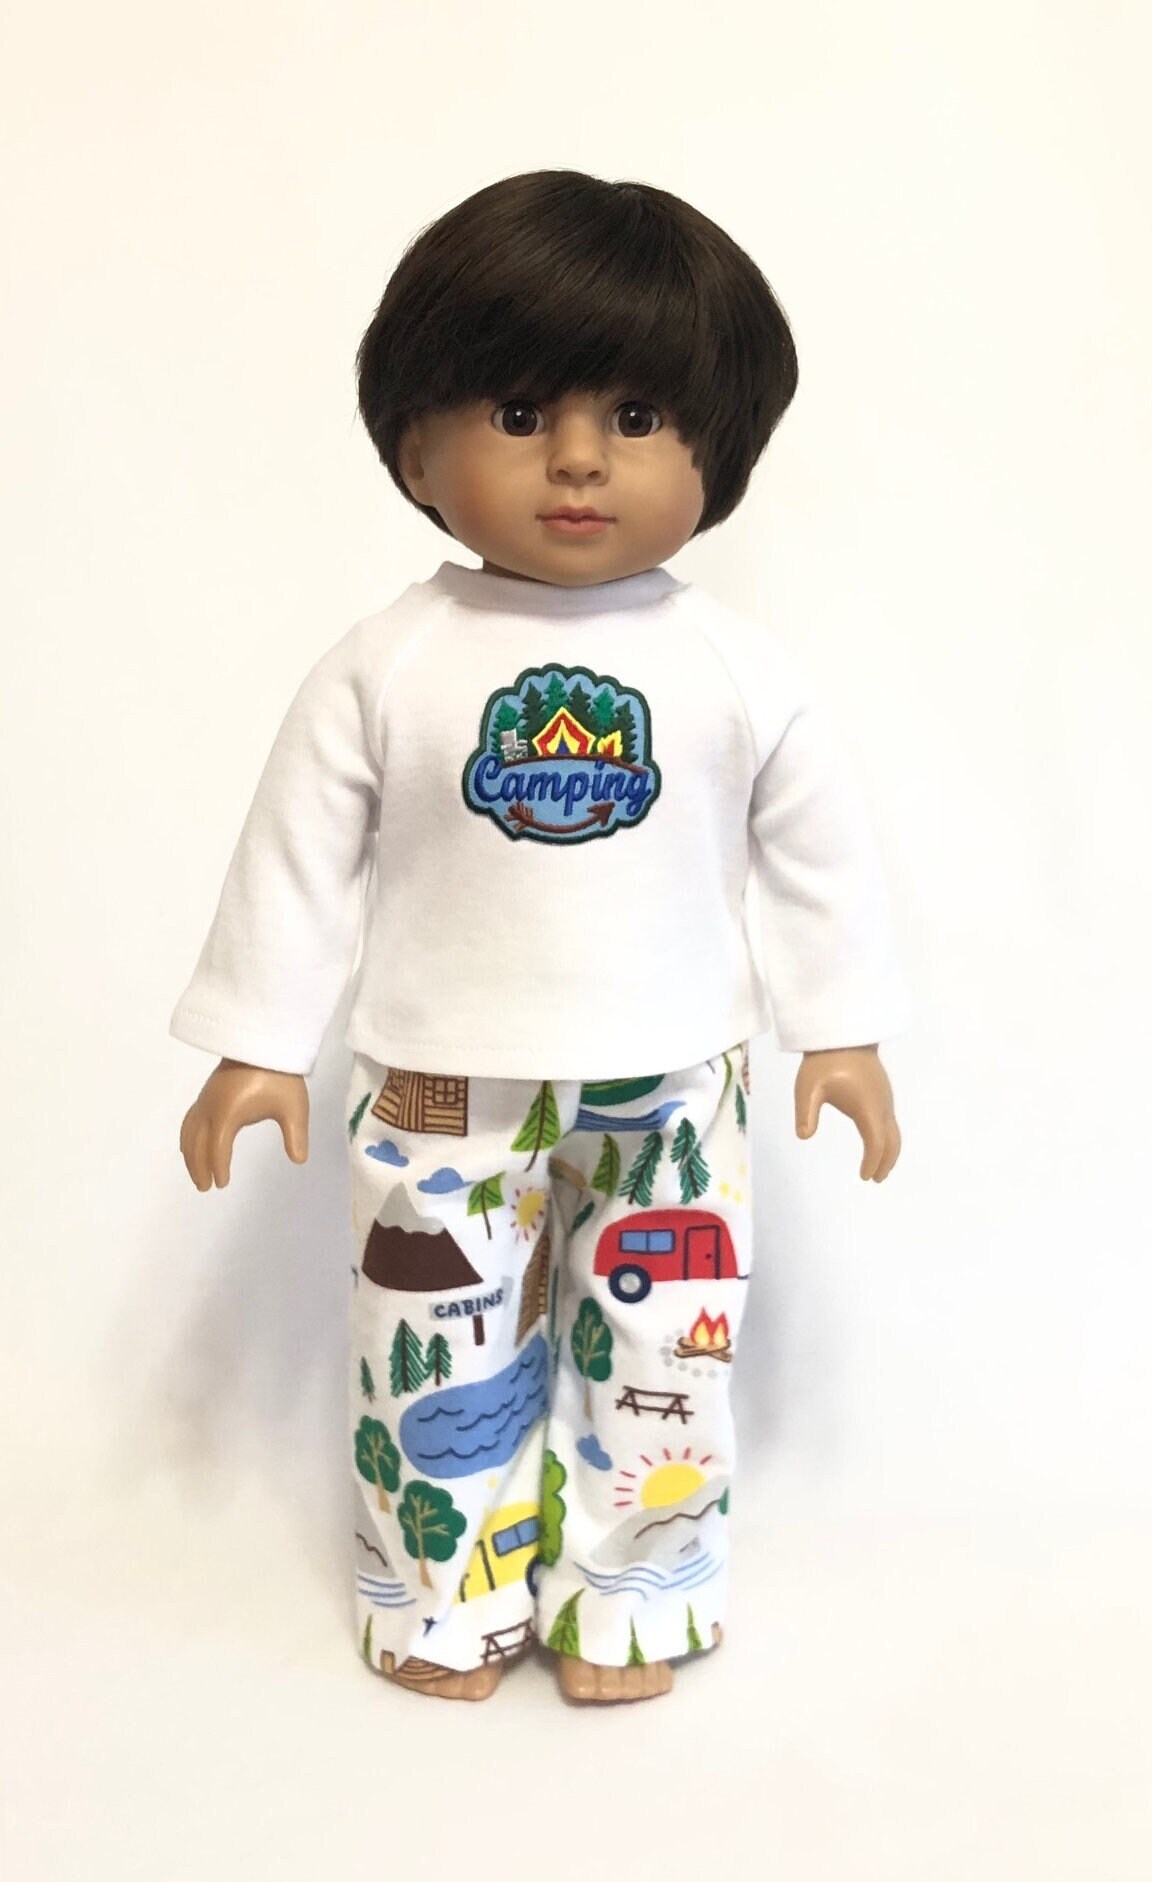 Camping Pajamas for American Girl Doll and 18-inch Doll Camping